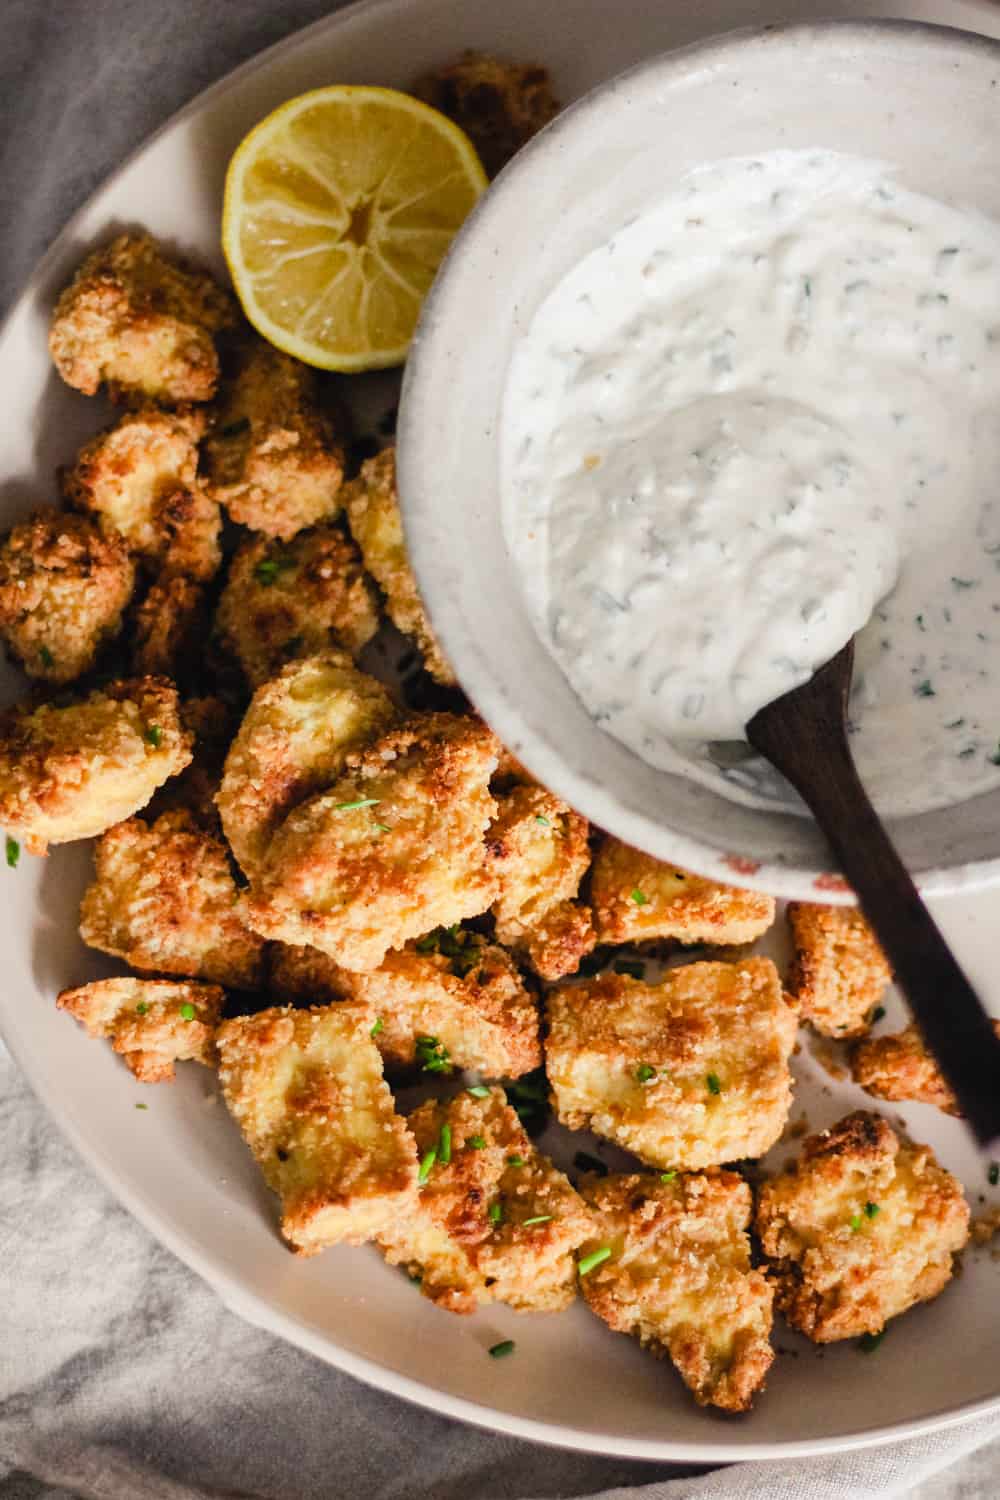 Crispy breaded tofu nuggets on a plate with a bowl of yogurt ranch dip.